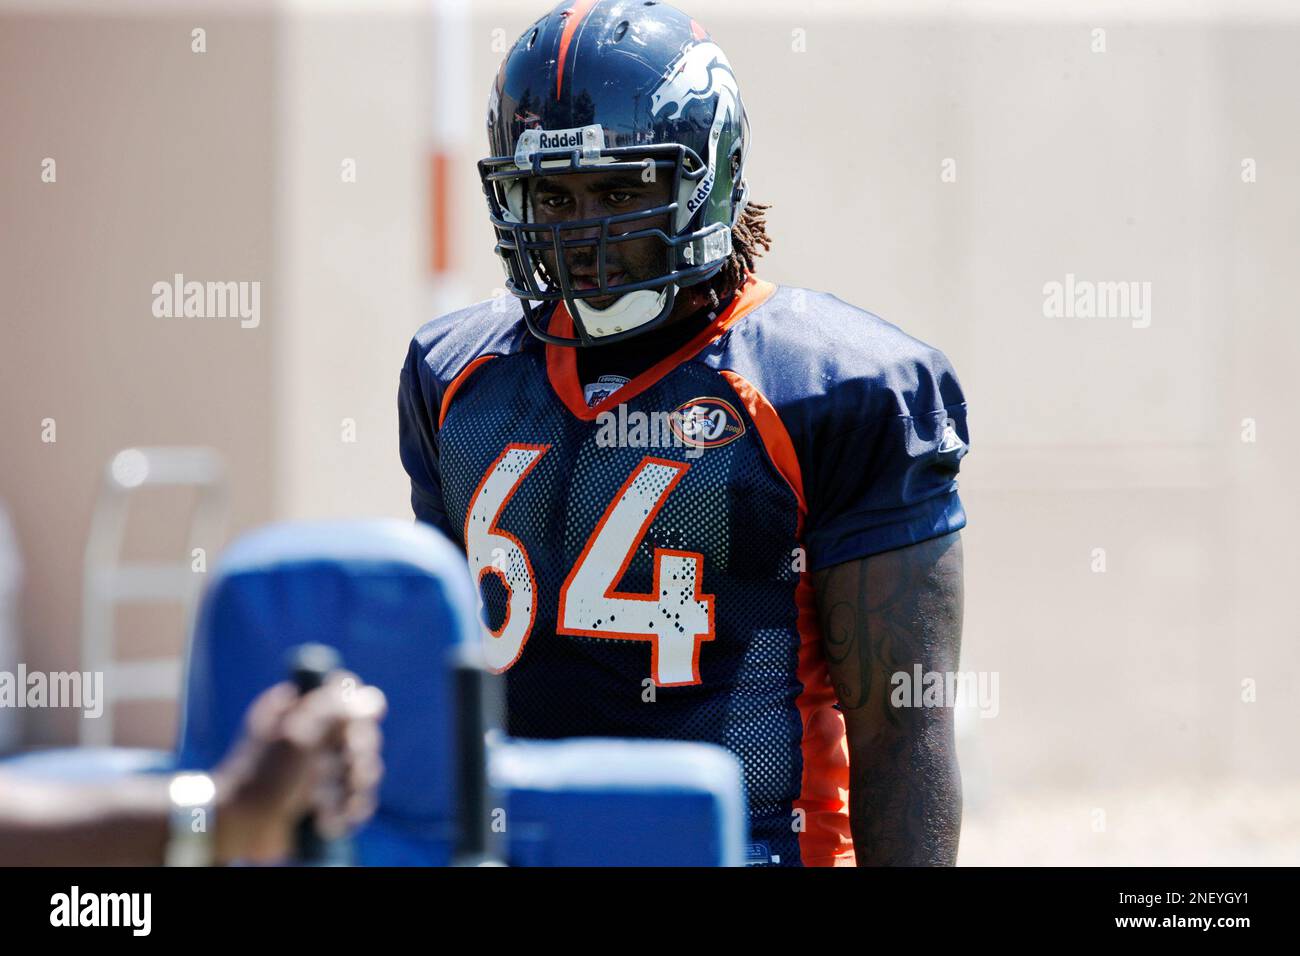 Final day of Broncos training camp Thursday